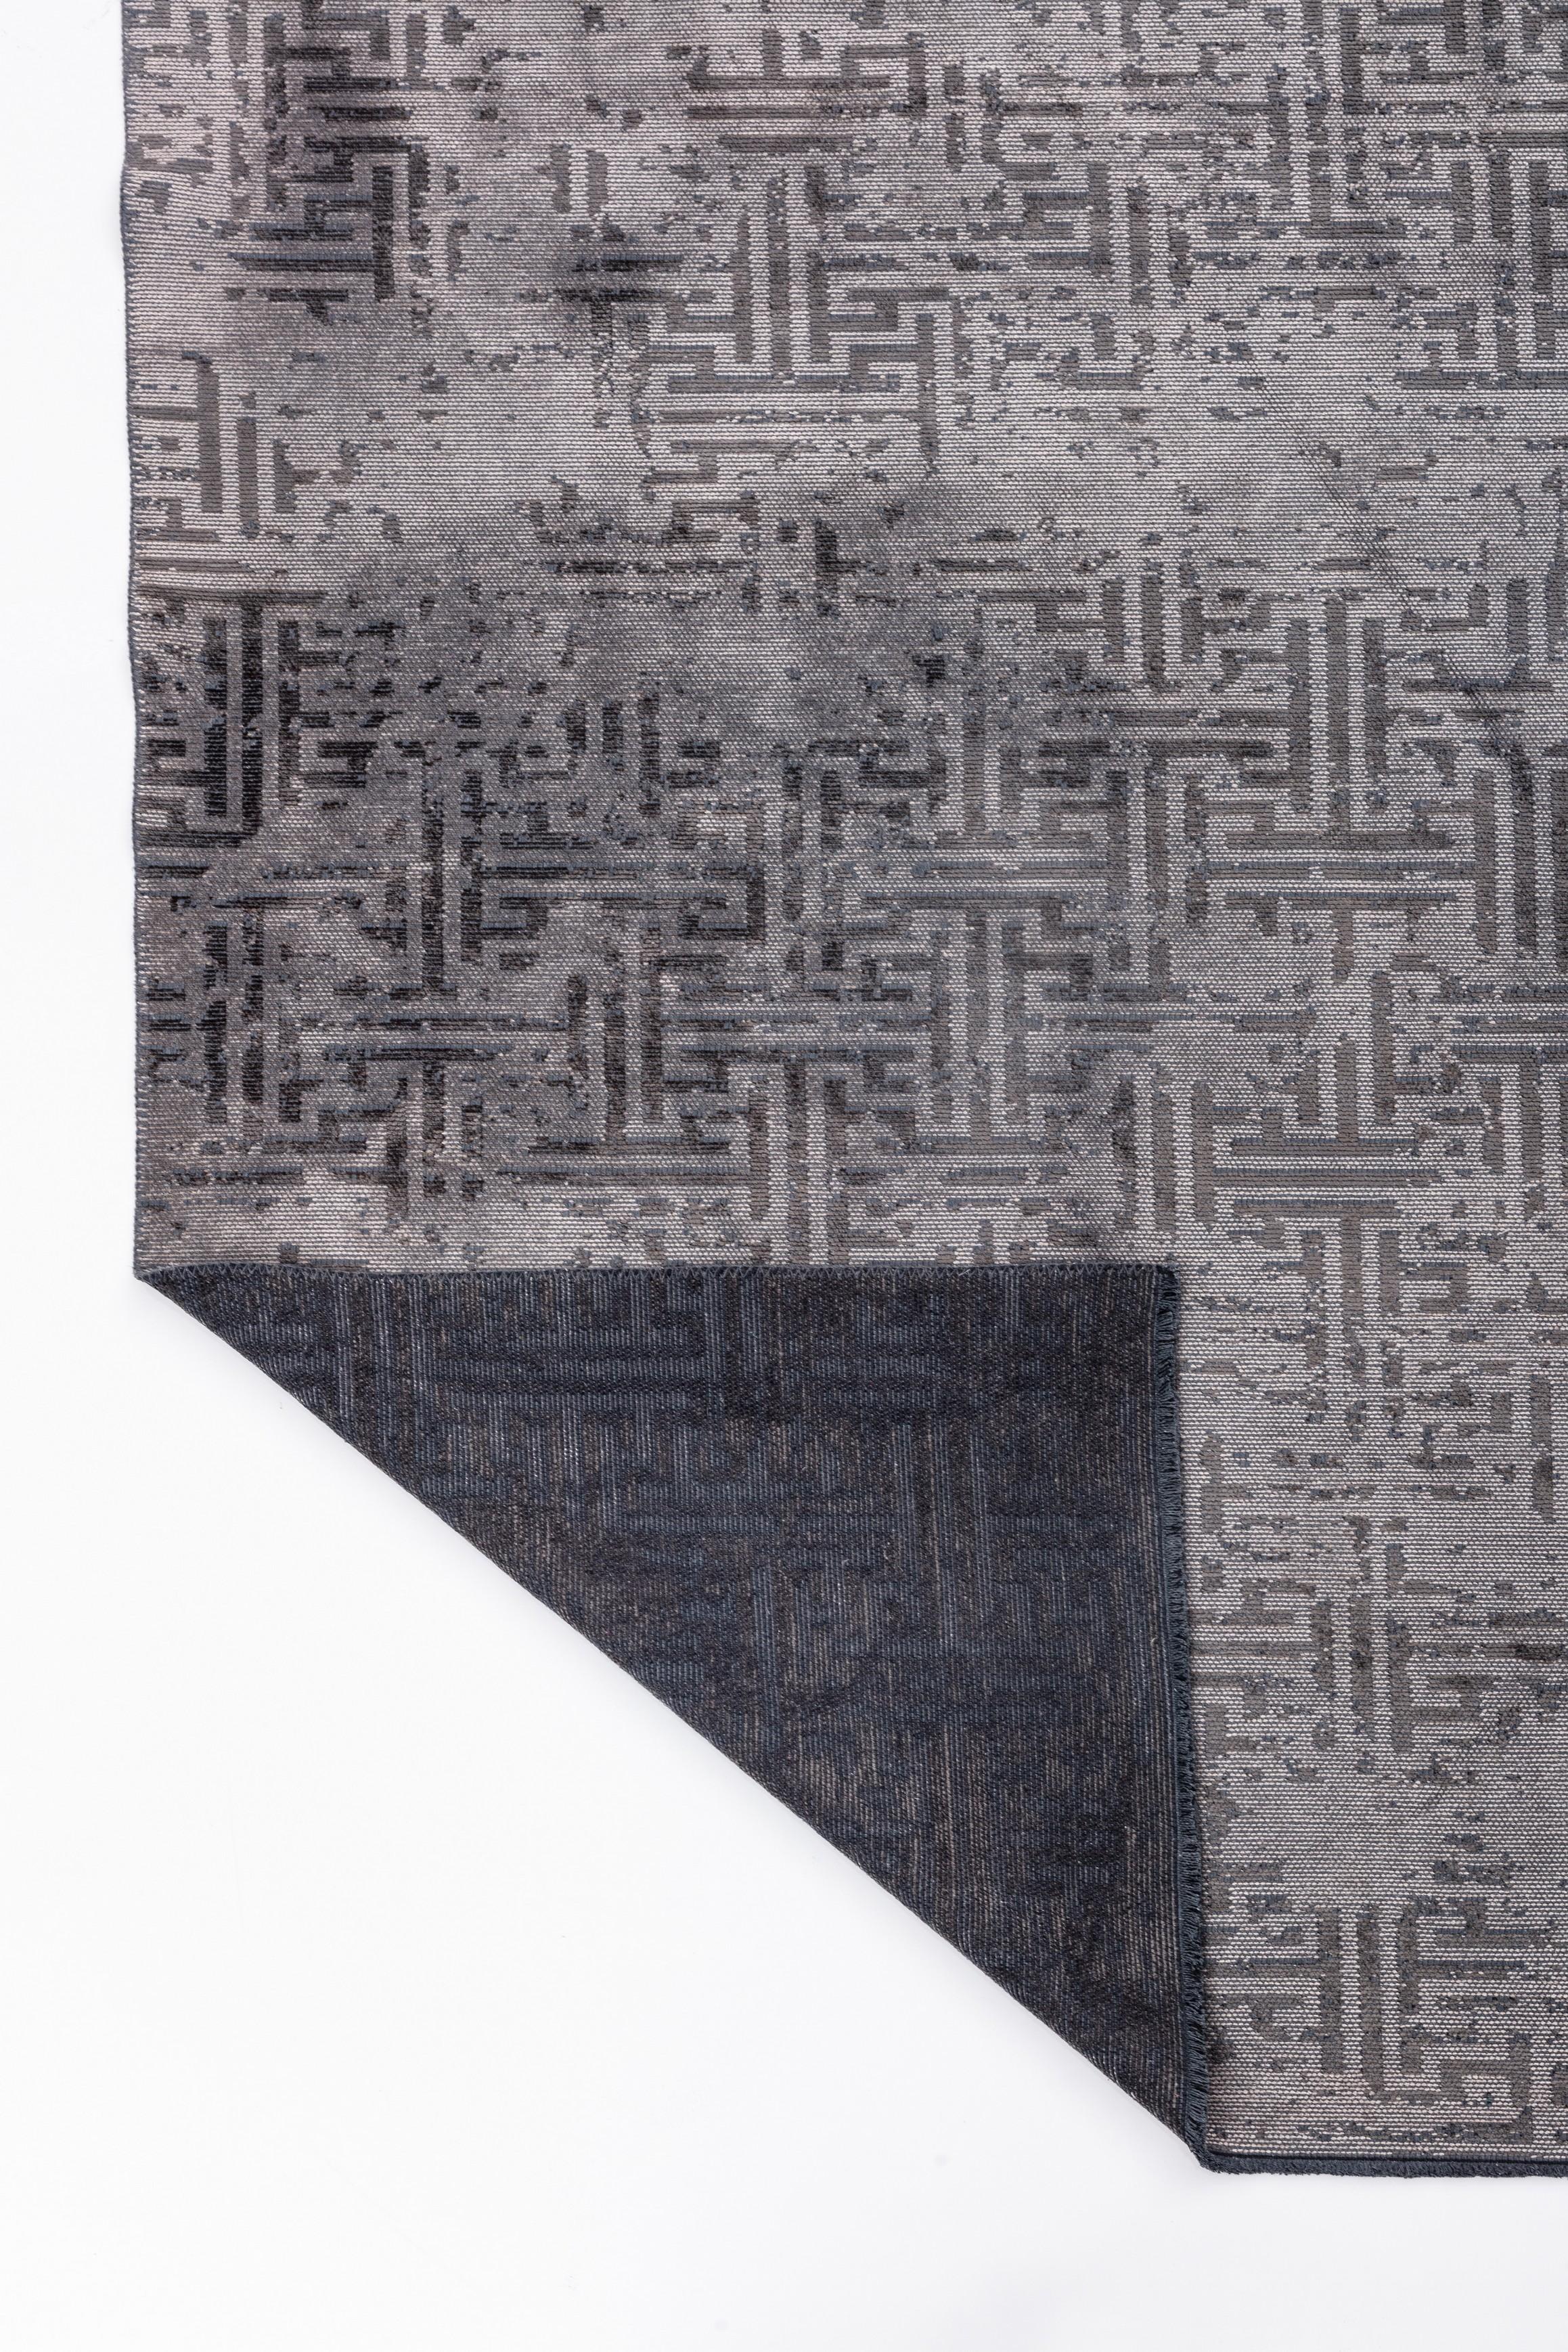 For Sale:  (Gray) Modern Toile Luxury Hand-Finished Area Rug 3